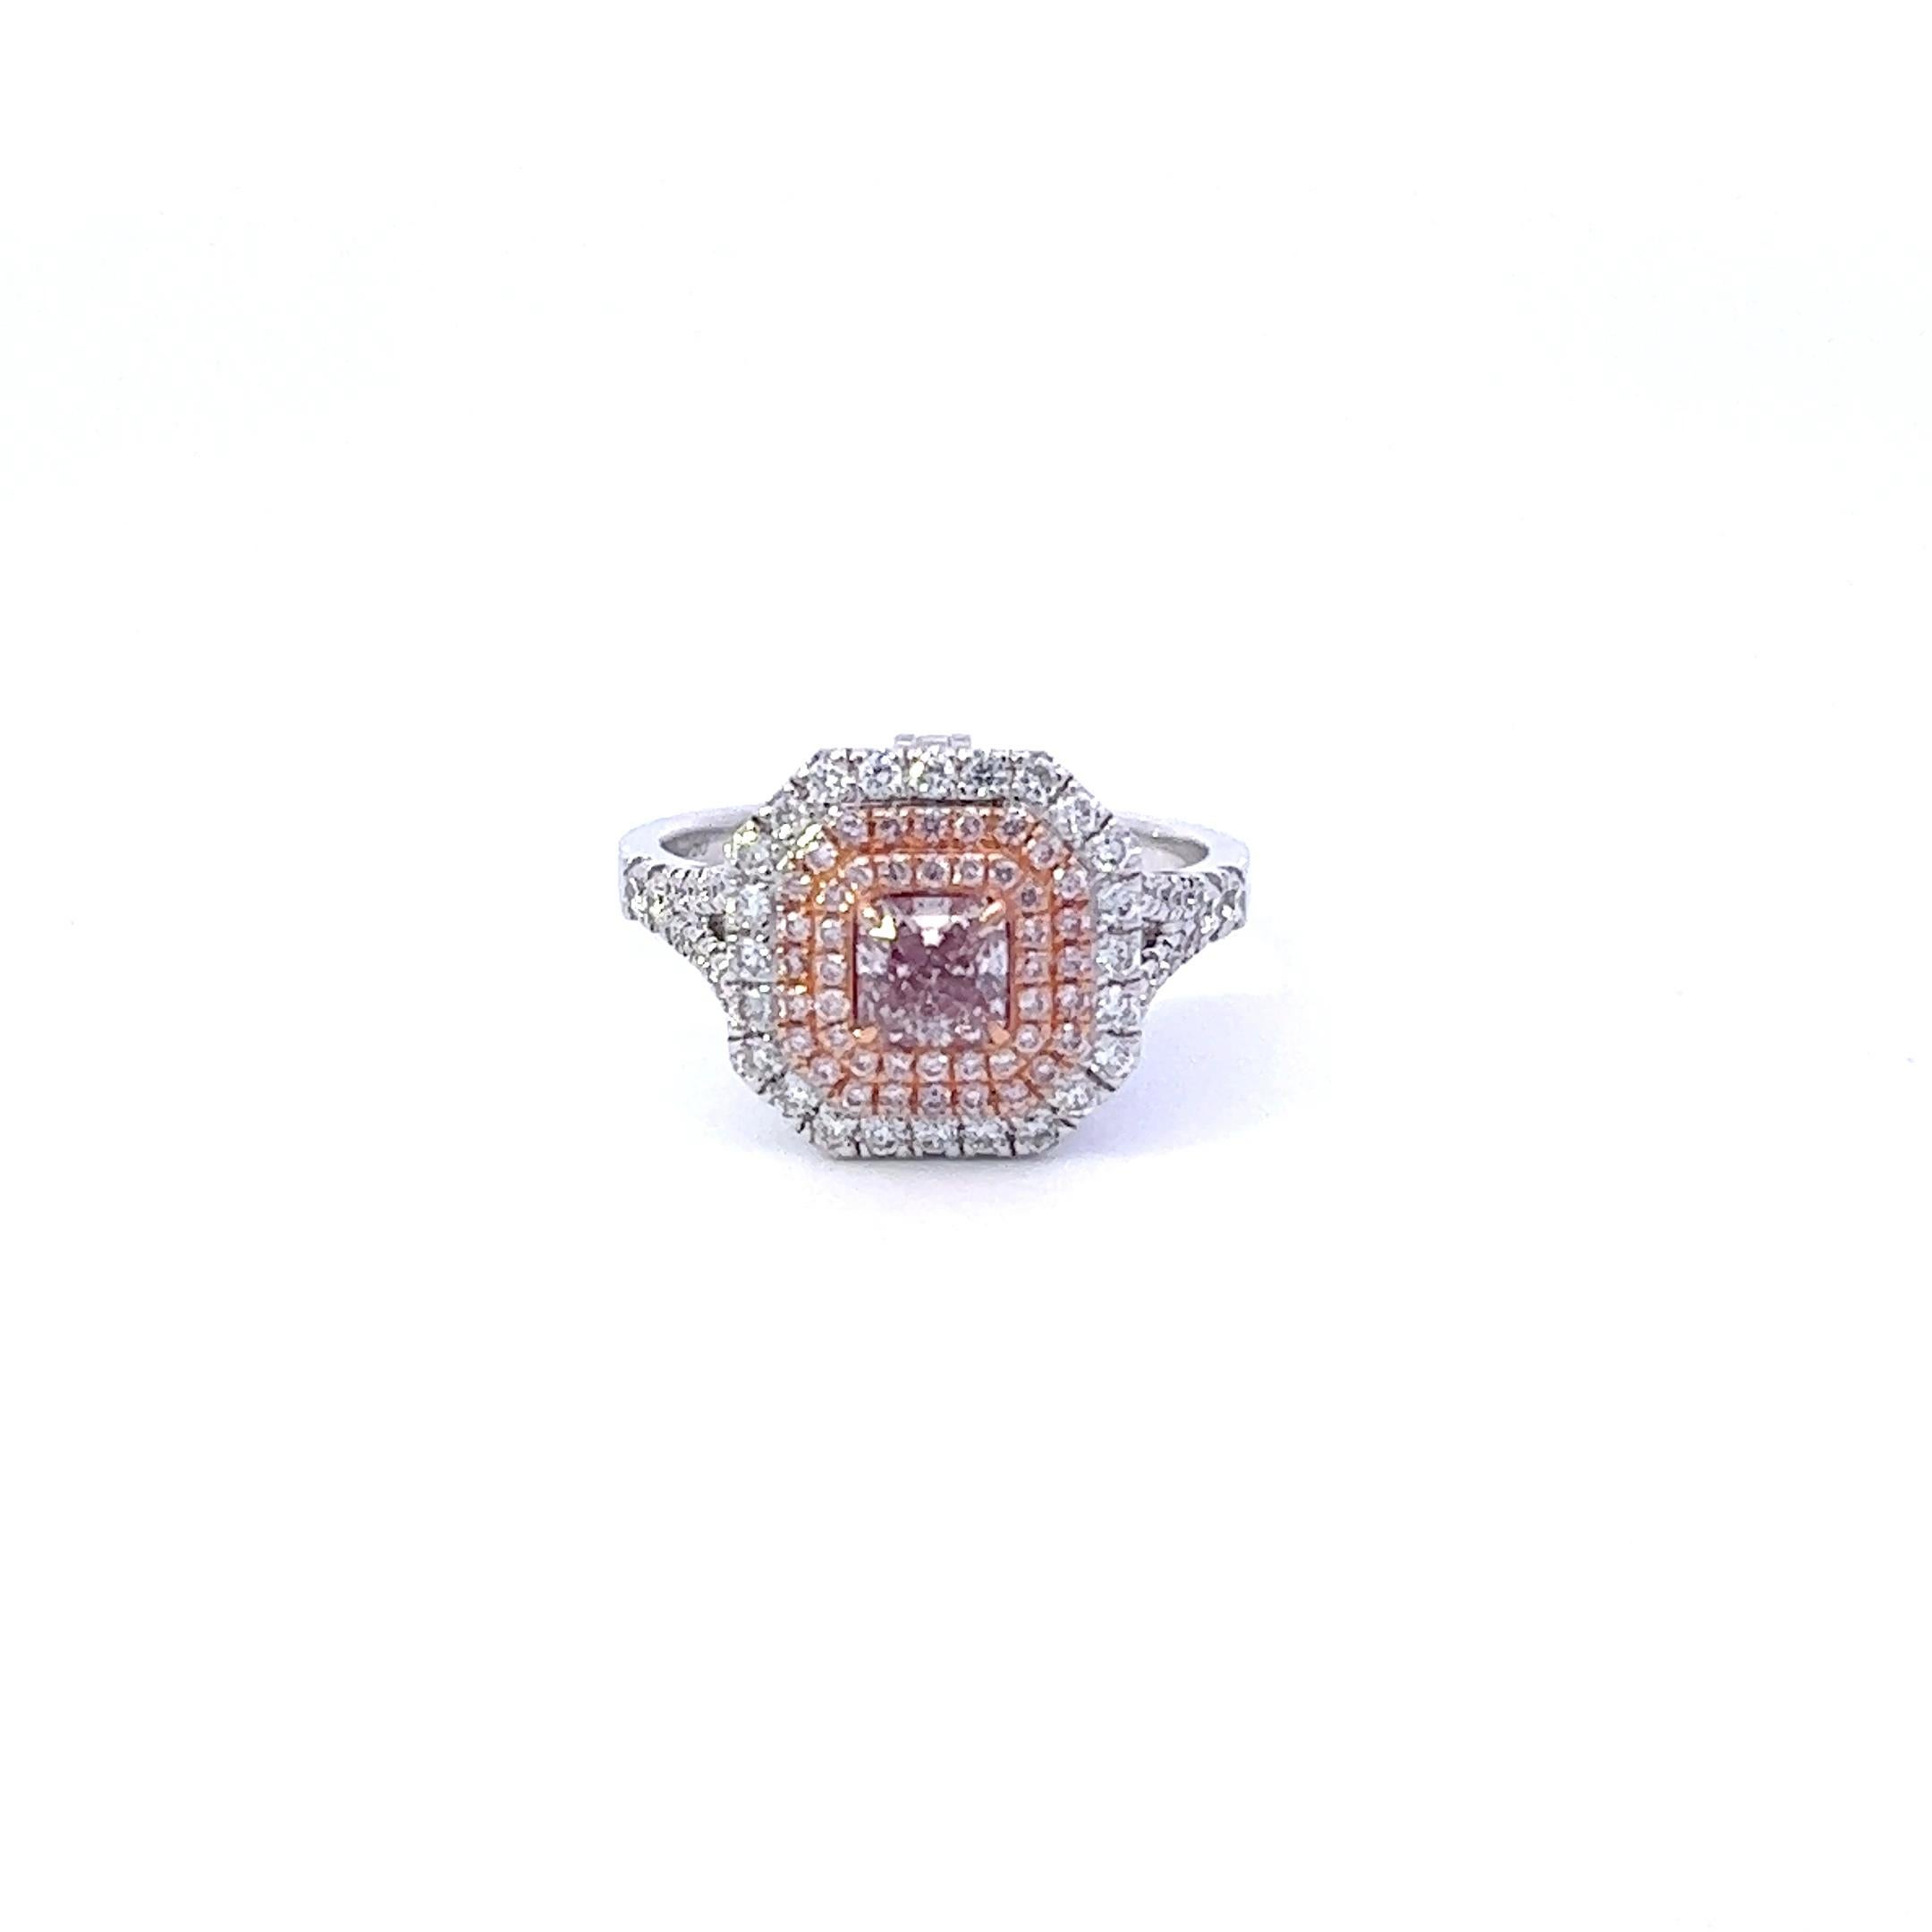 Square Cut GIA Certified 0.51 Carat Light Pink Diamond Ring For Sale